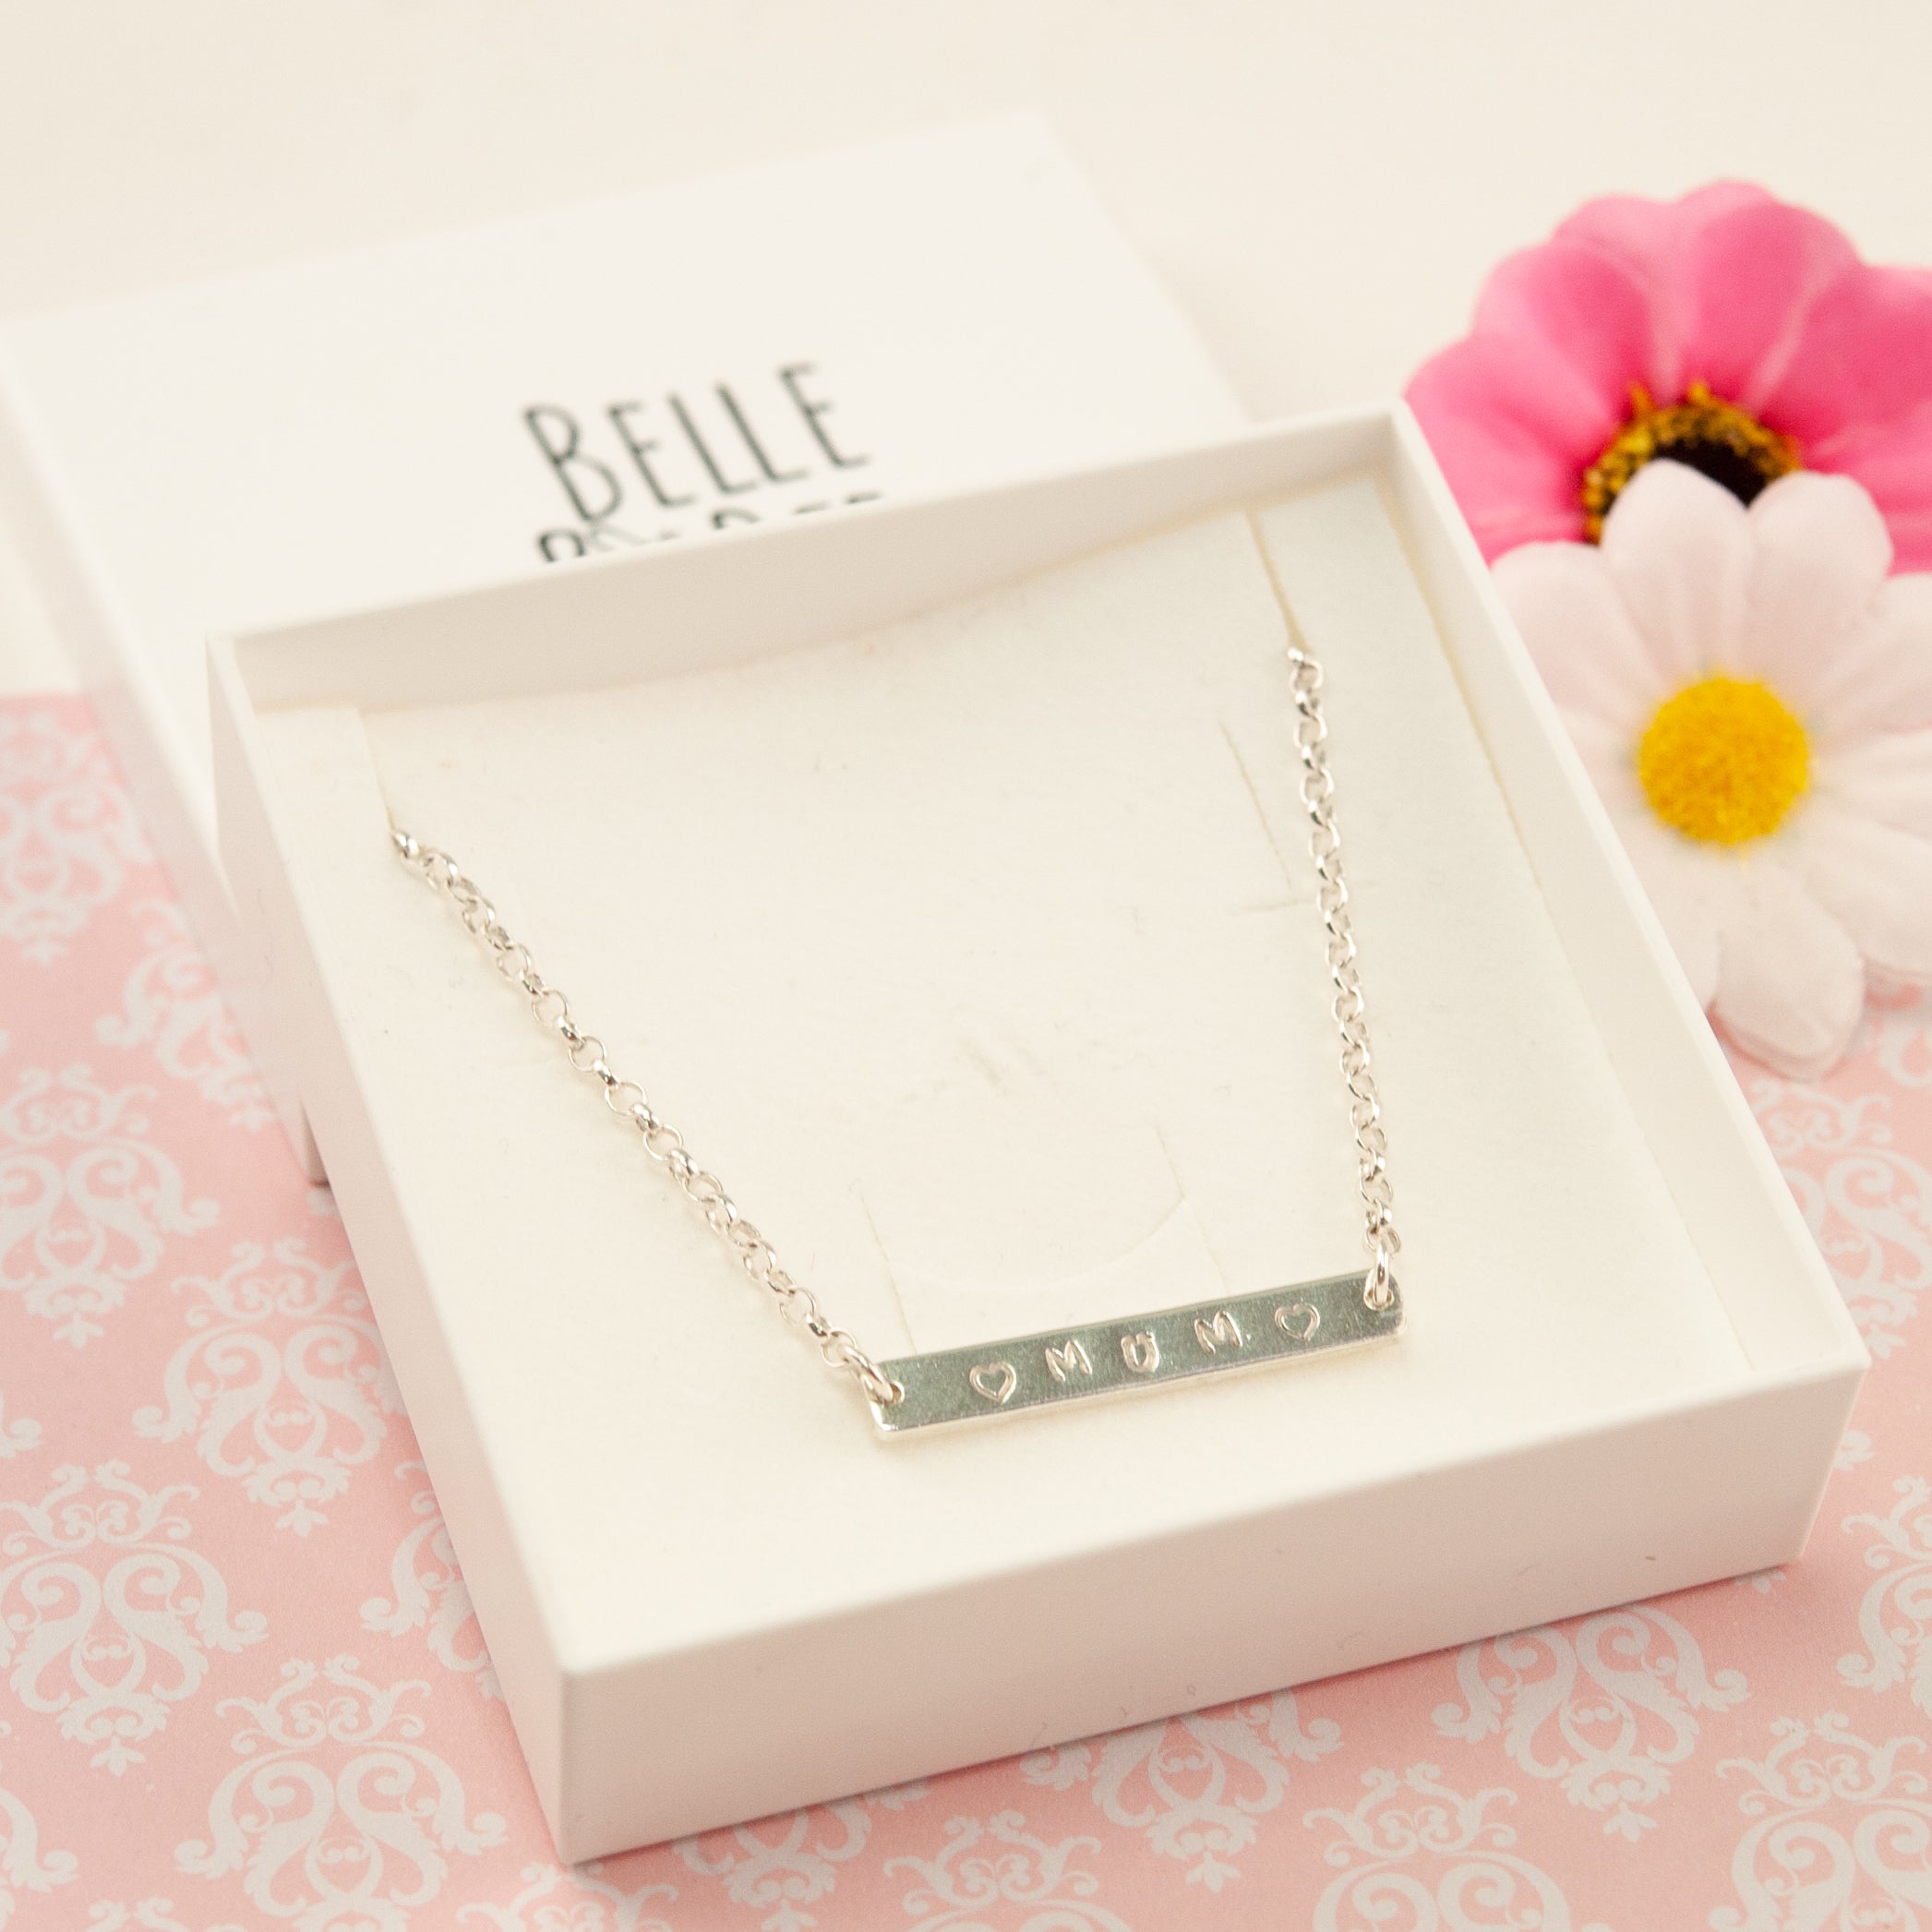 Belle & Bee sterling silver bar necklace